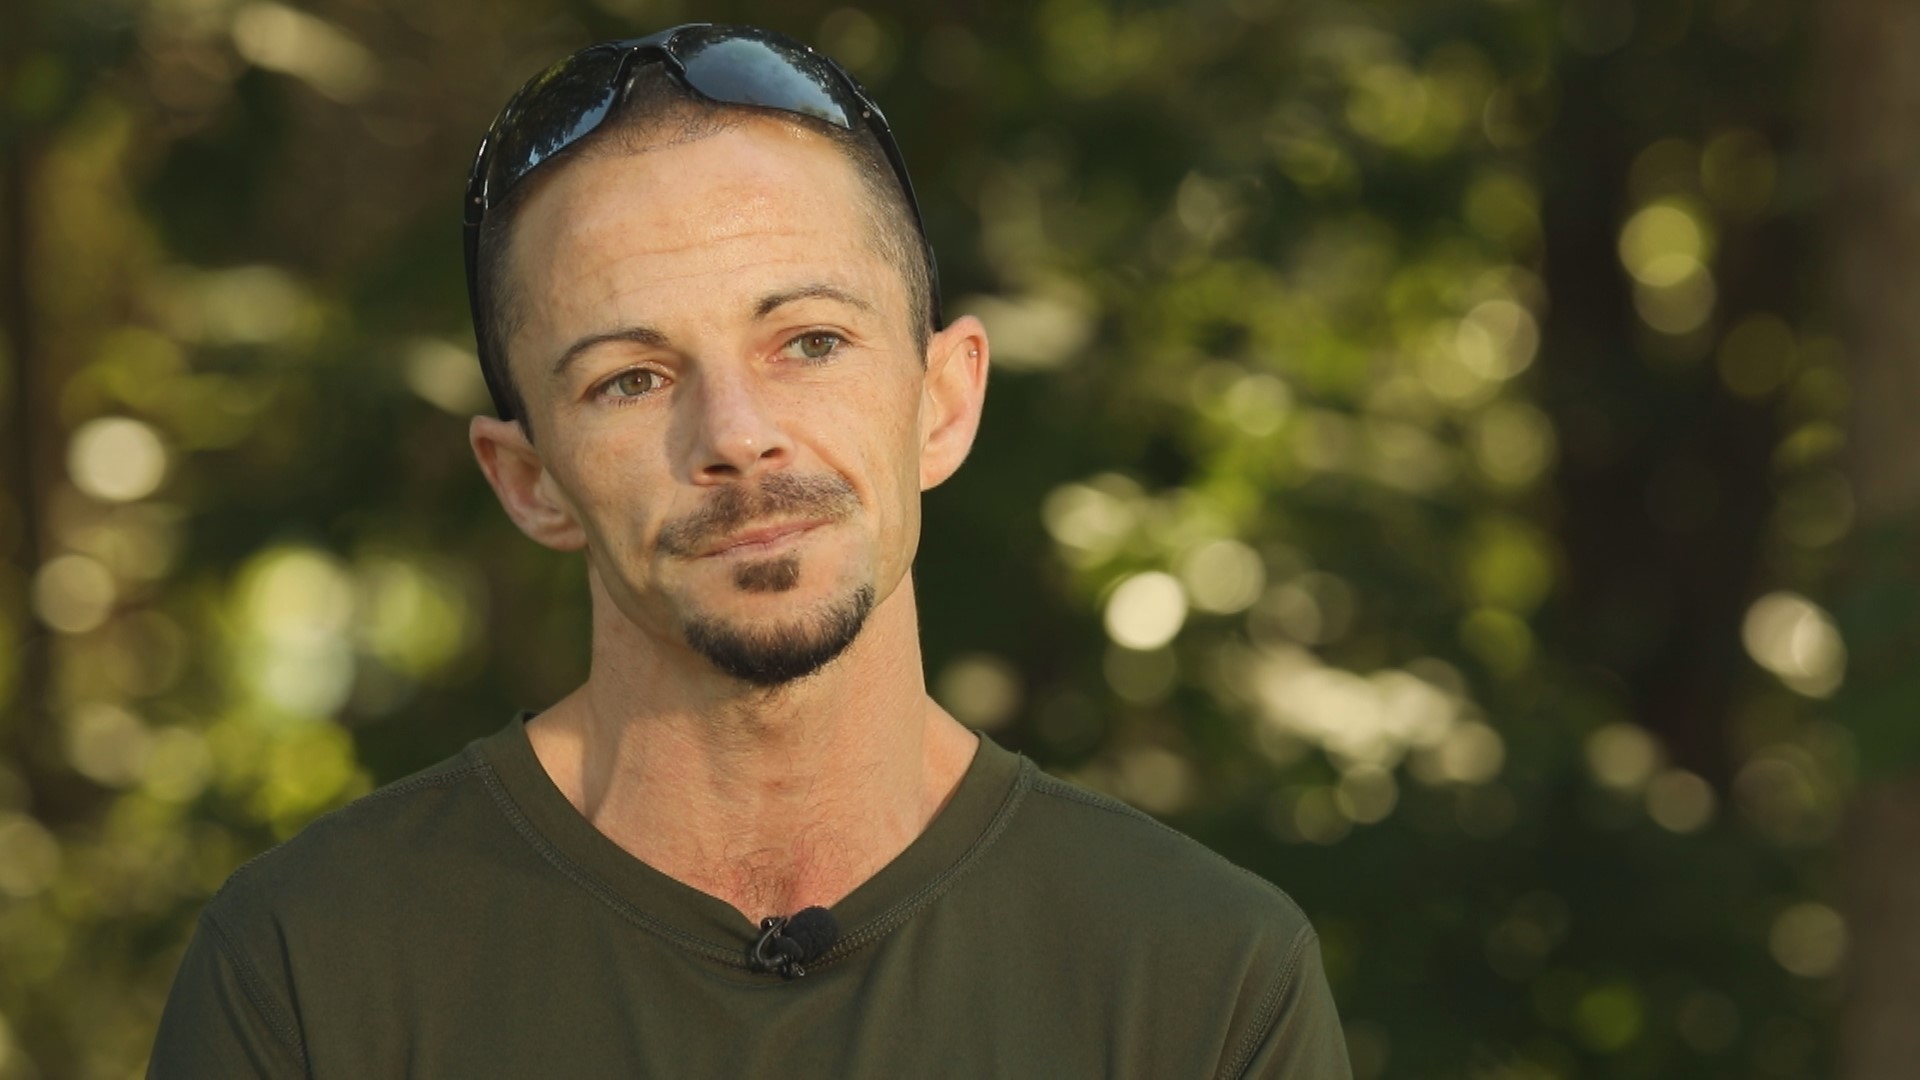 Nate Cannon has faced some major life challenges. Running has helped him through them all.